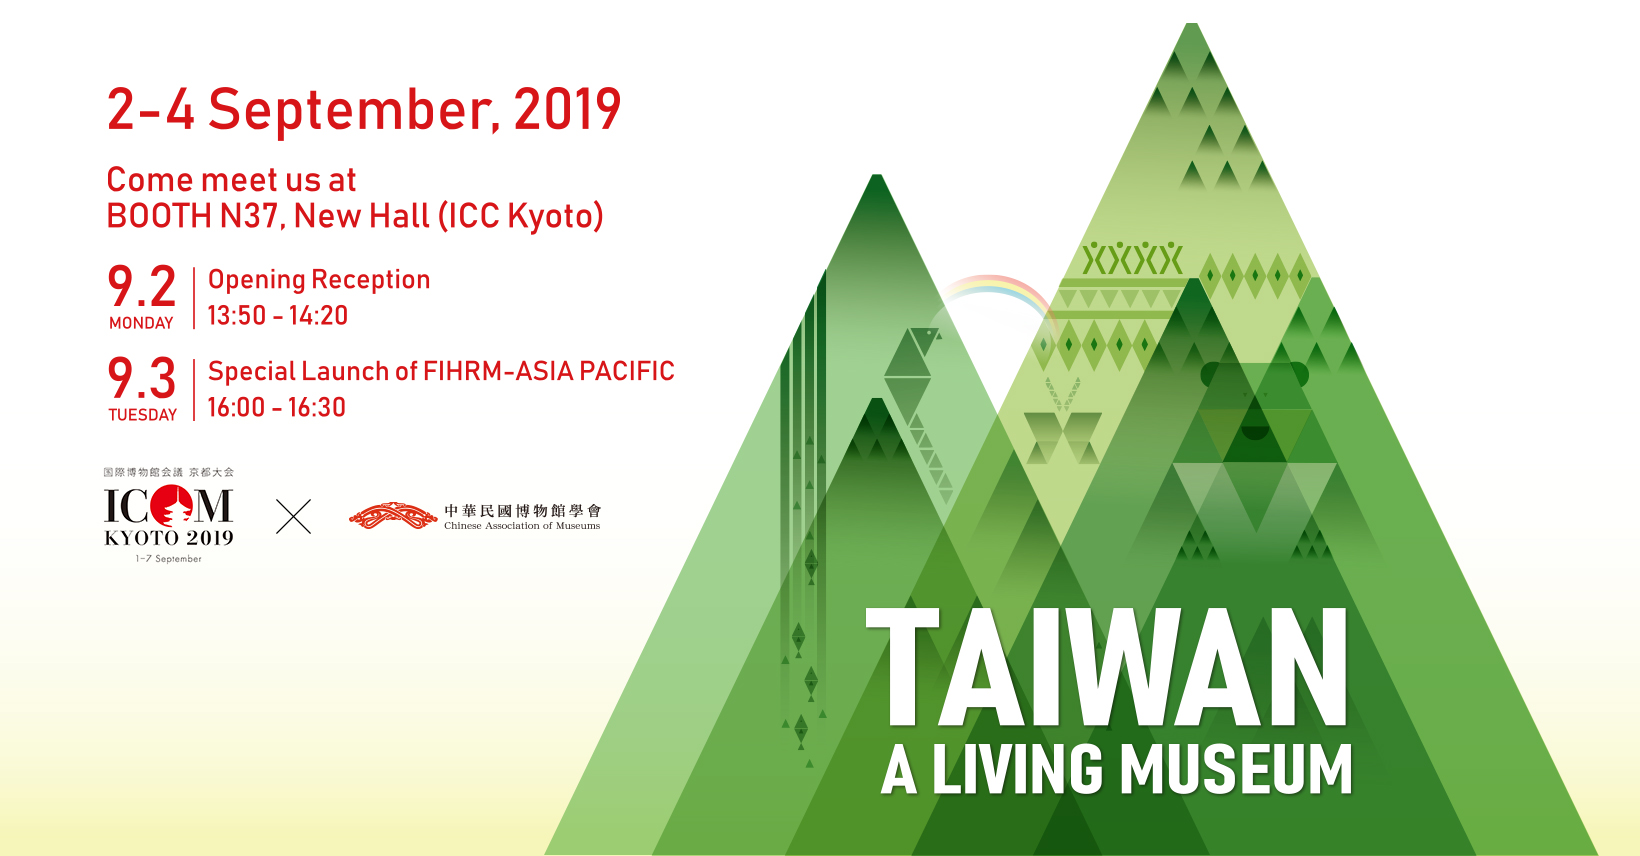 Taiwan to promote inclusive values at Kyoto ICOM museum summit